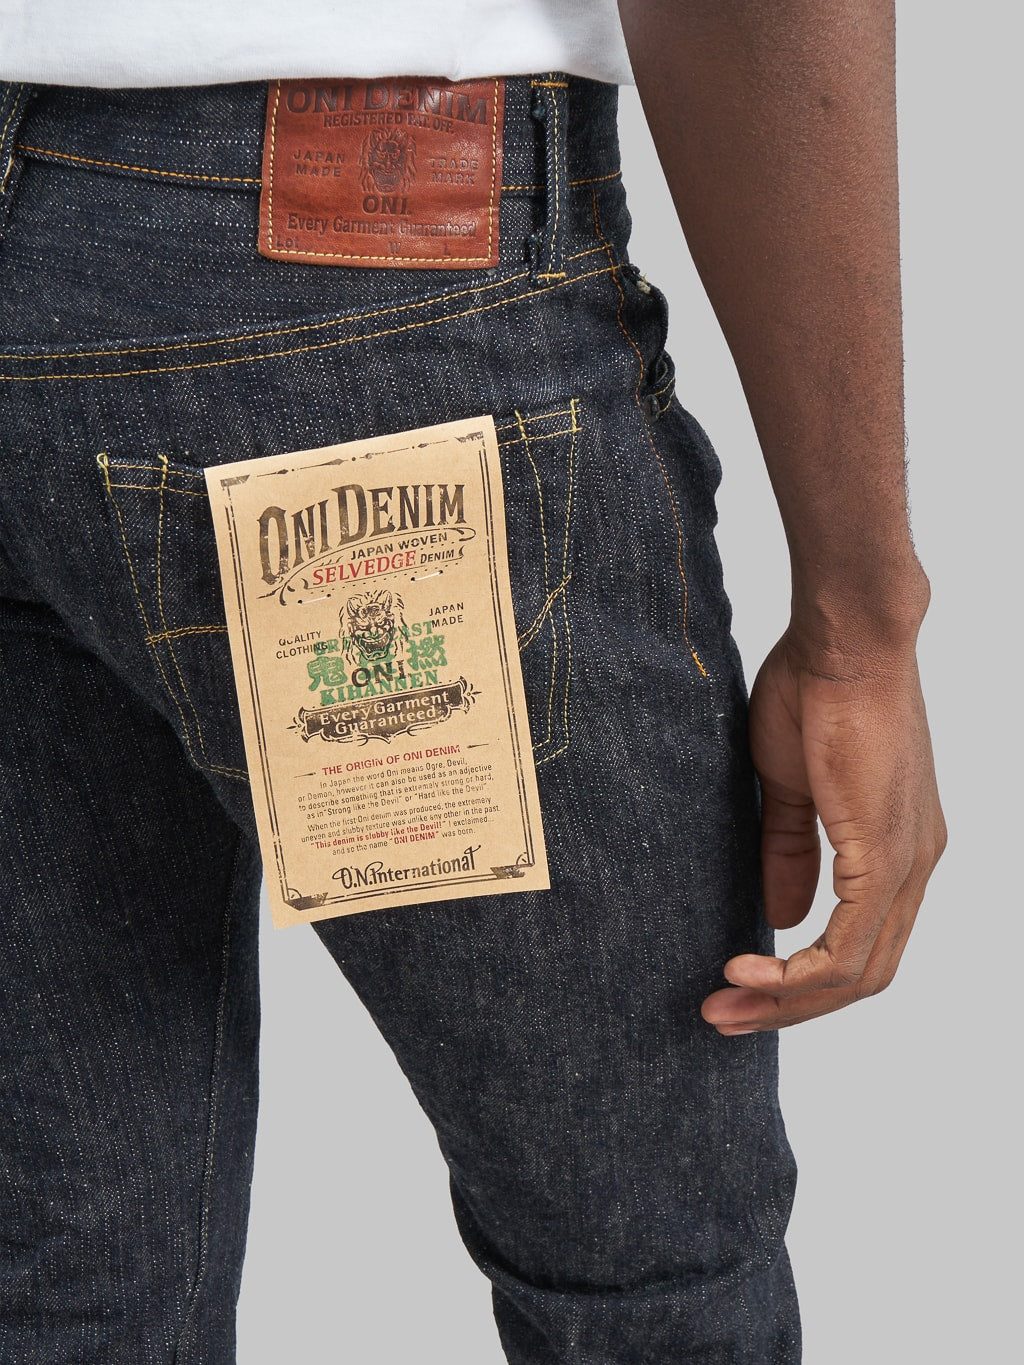 Oni denim kihannen relaxed tapered jeans flasher pocket